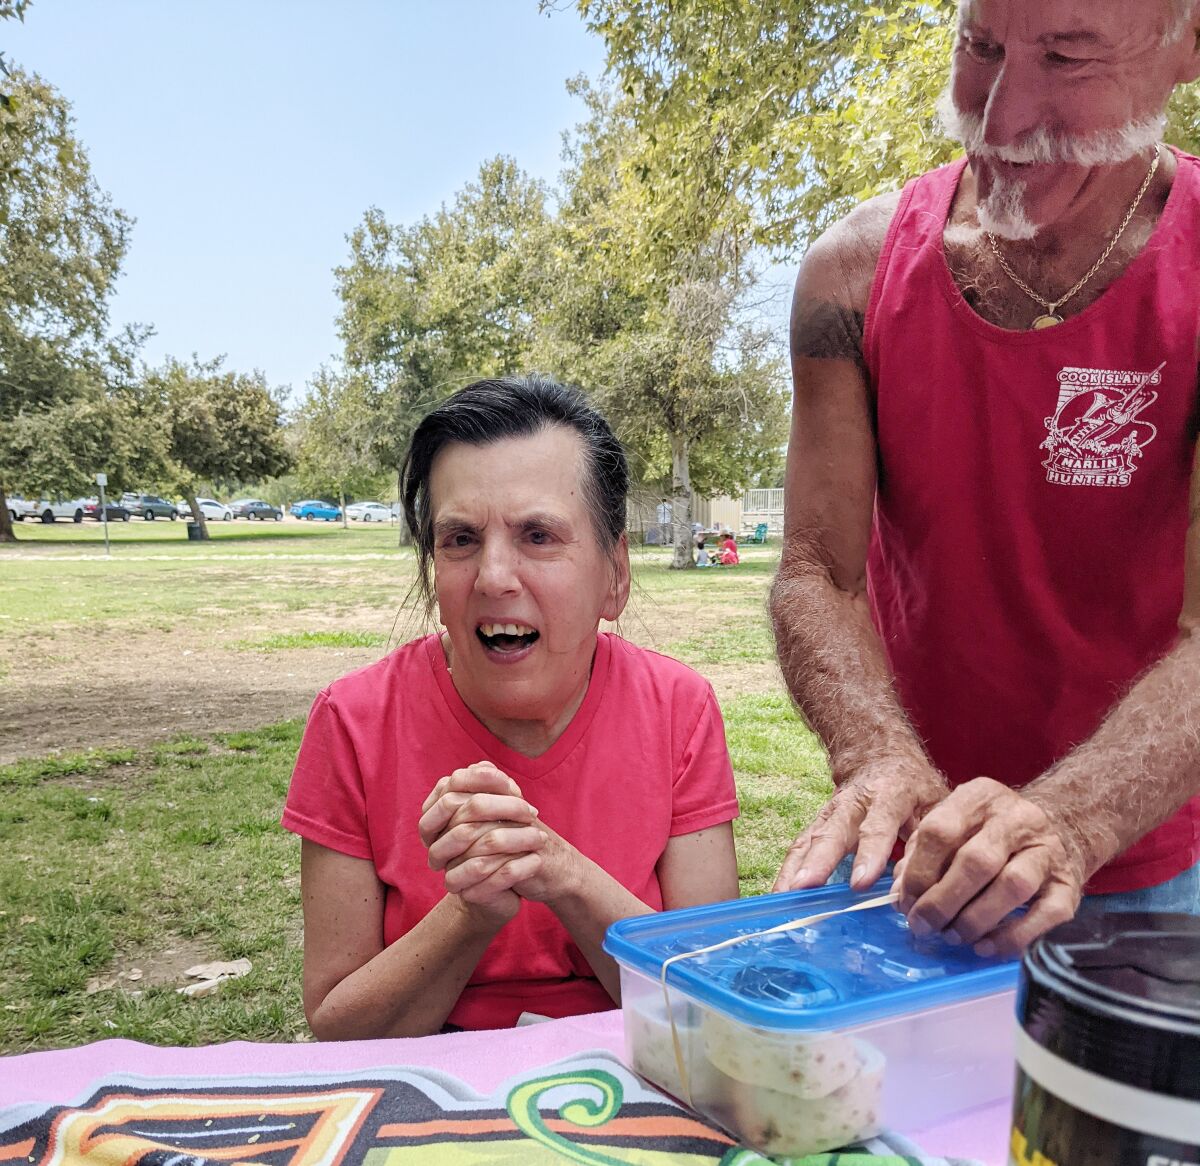 In August, Karen Sydow and brother Erik Sydow enjoyed a picnic at Lake Balboa Park in the San Fernando Valley. 